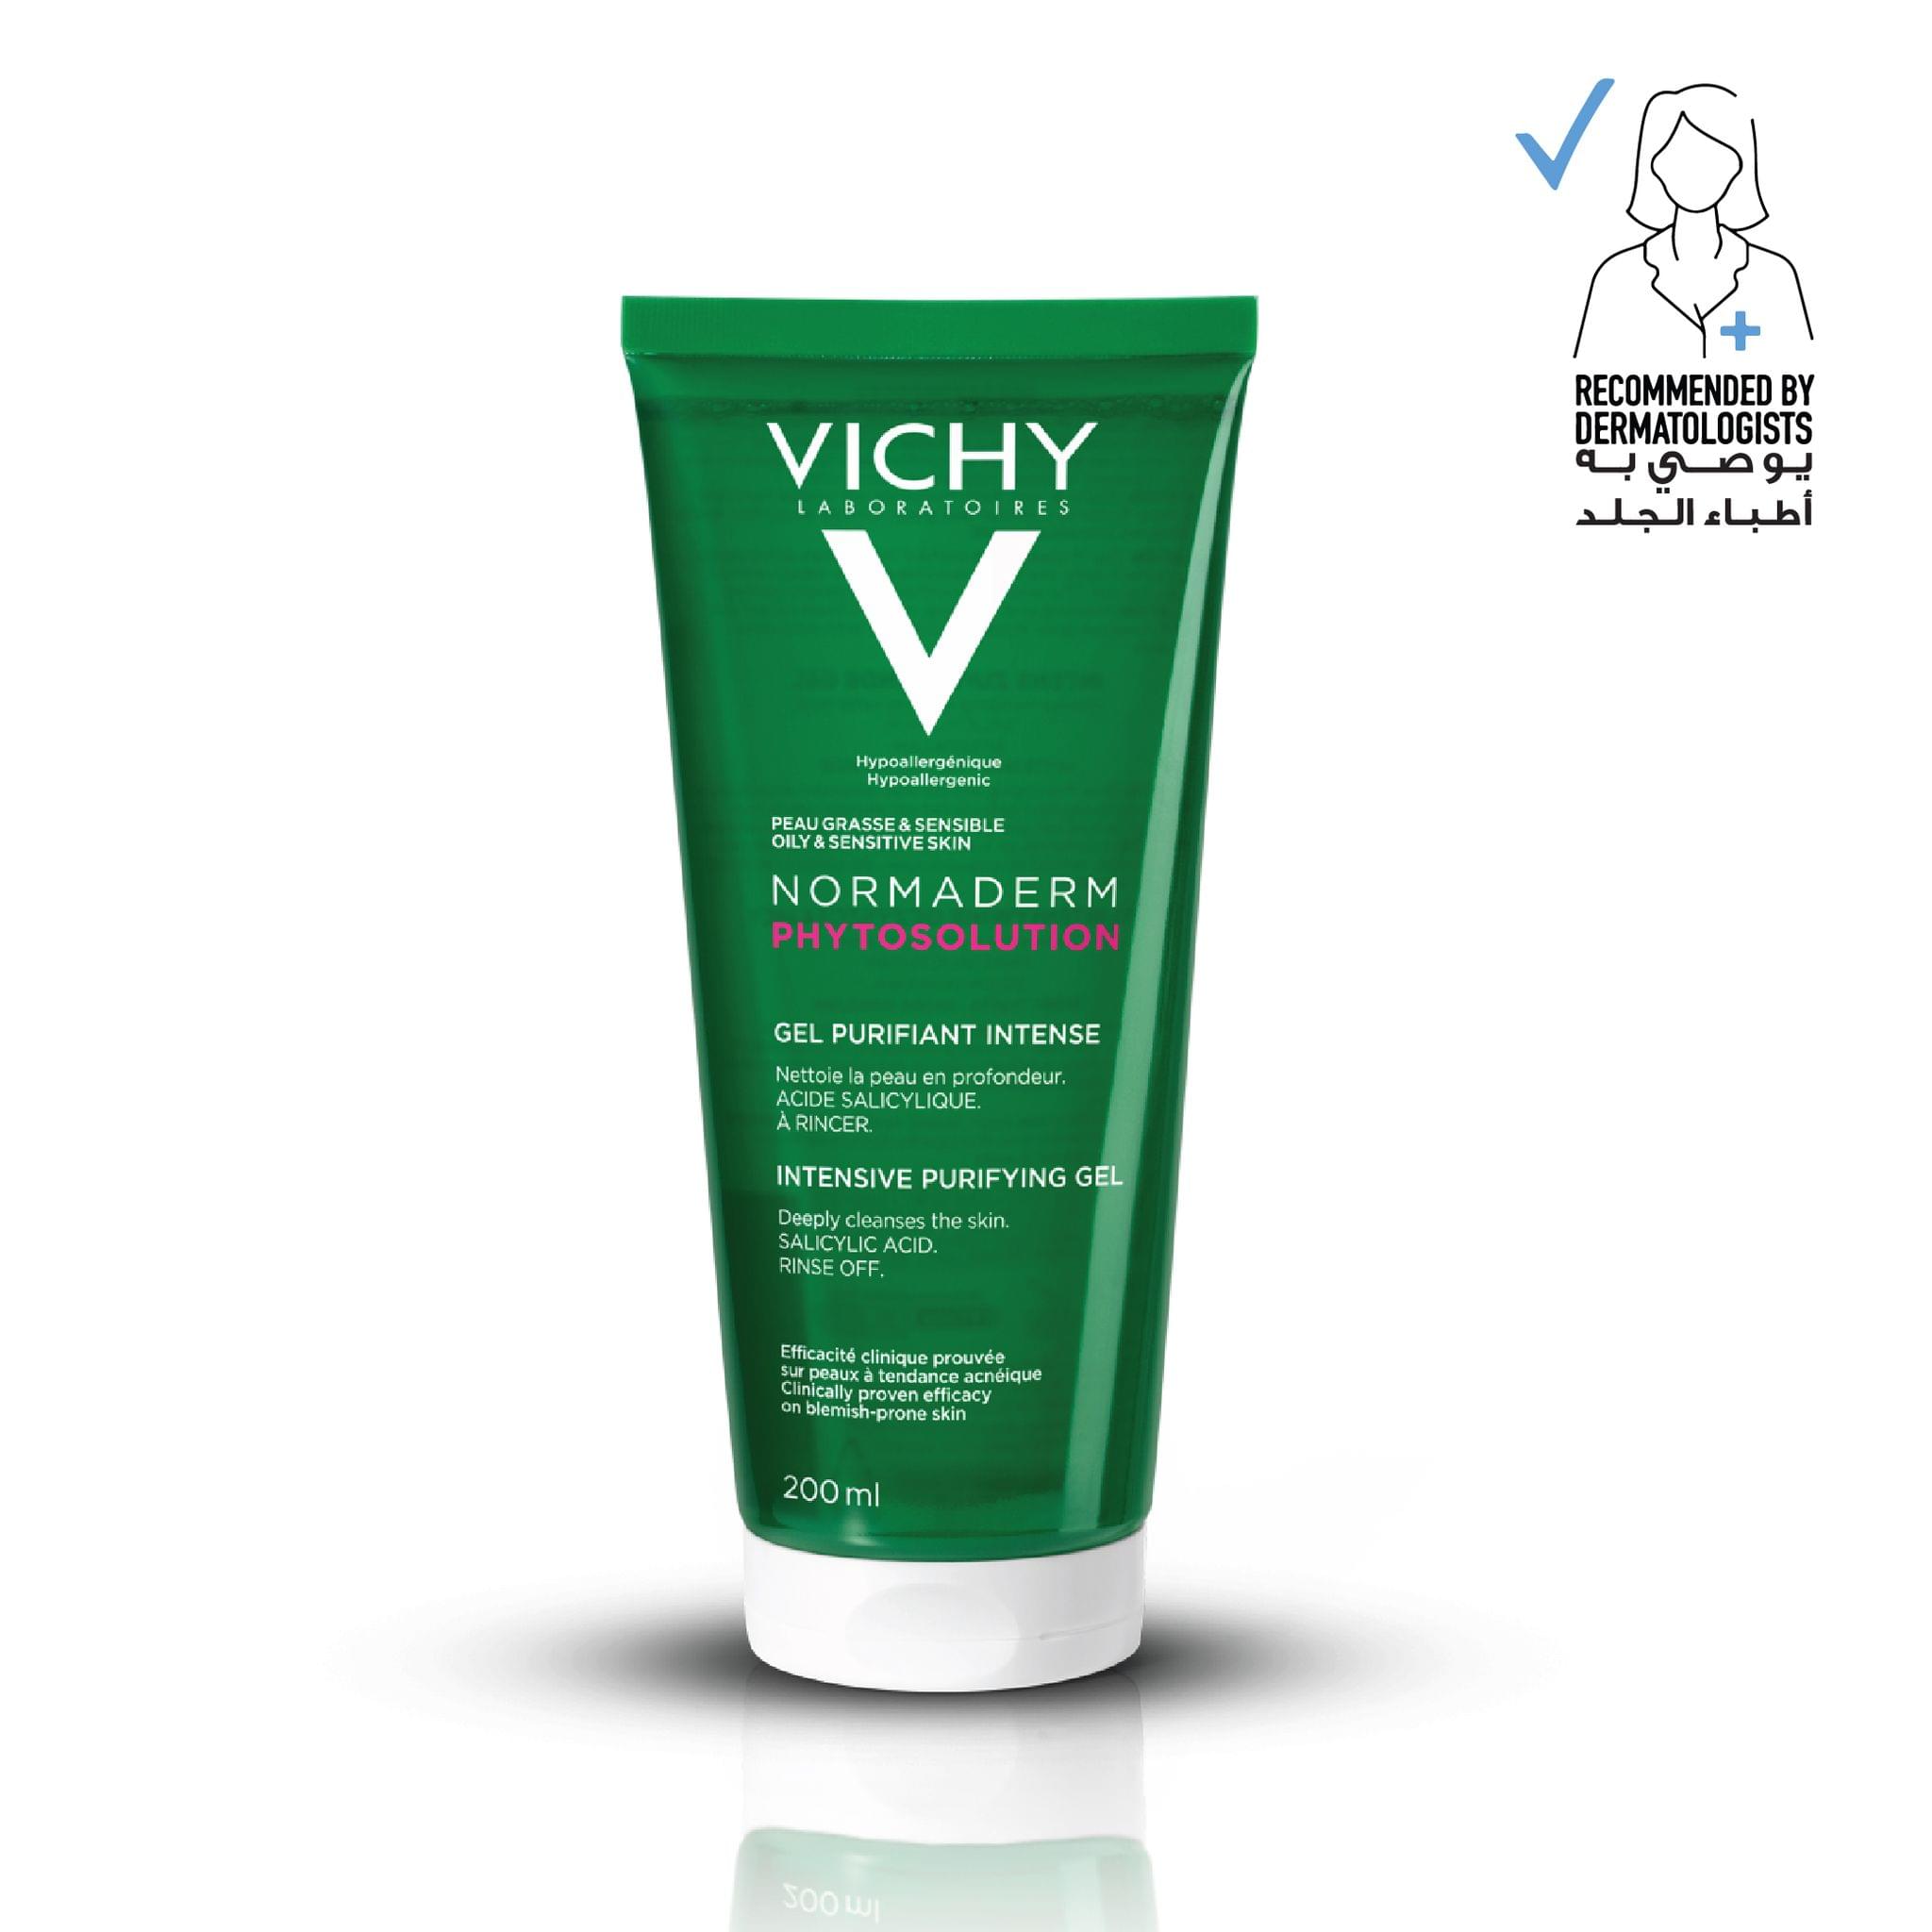 VICHY Normaderm Phytosolution Face Cleansing Gel for Oily/Acne-Prone Skin with Salicylic Acid 200ml